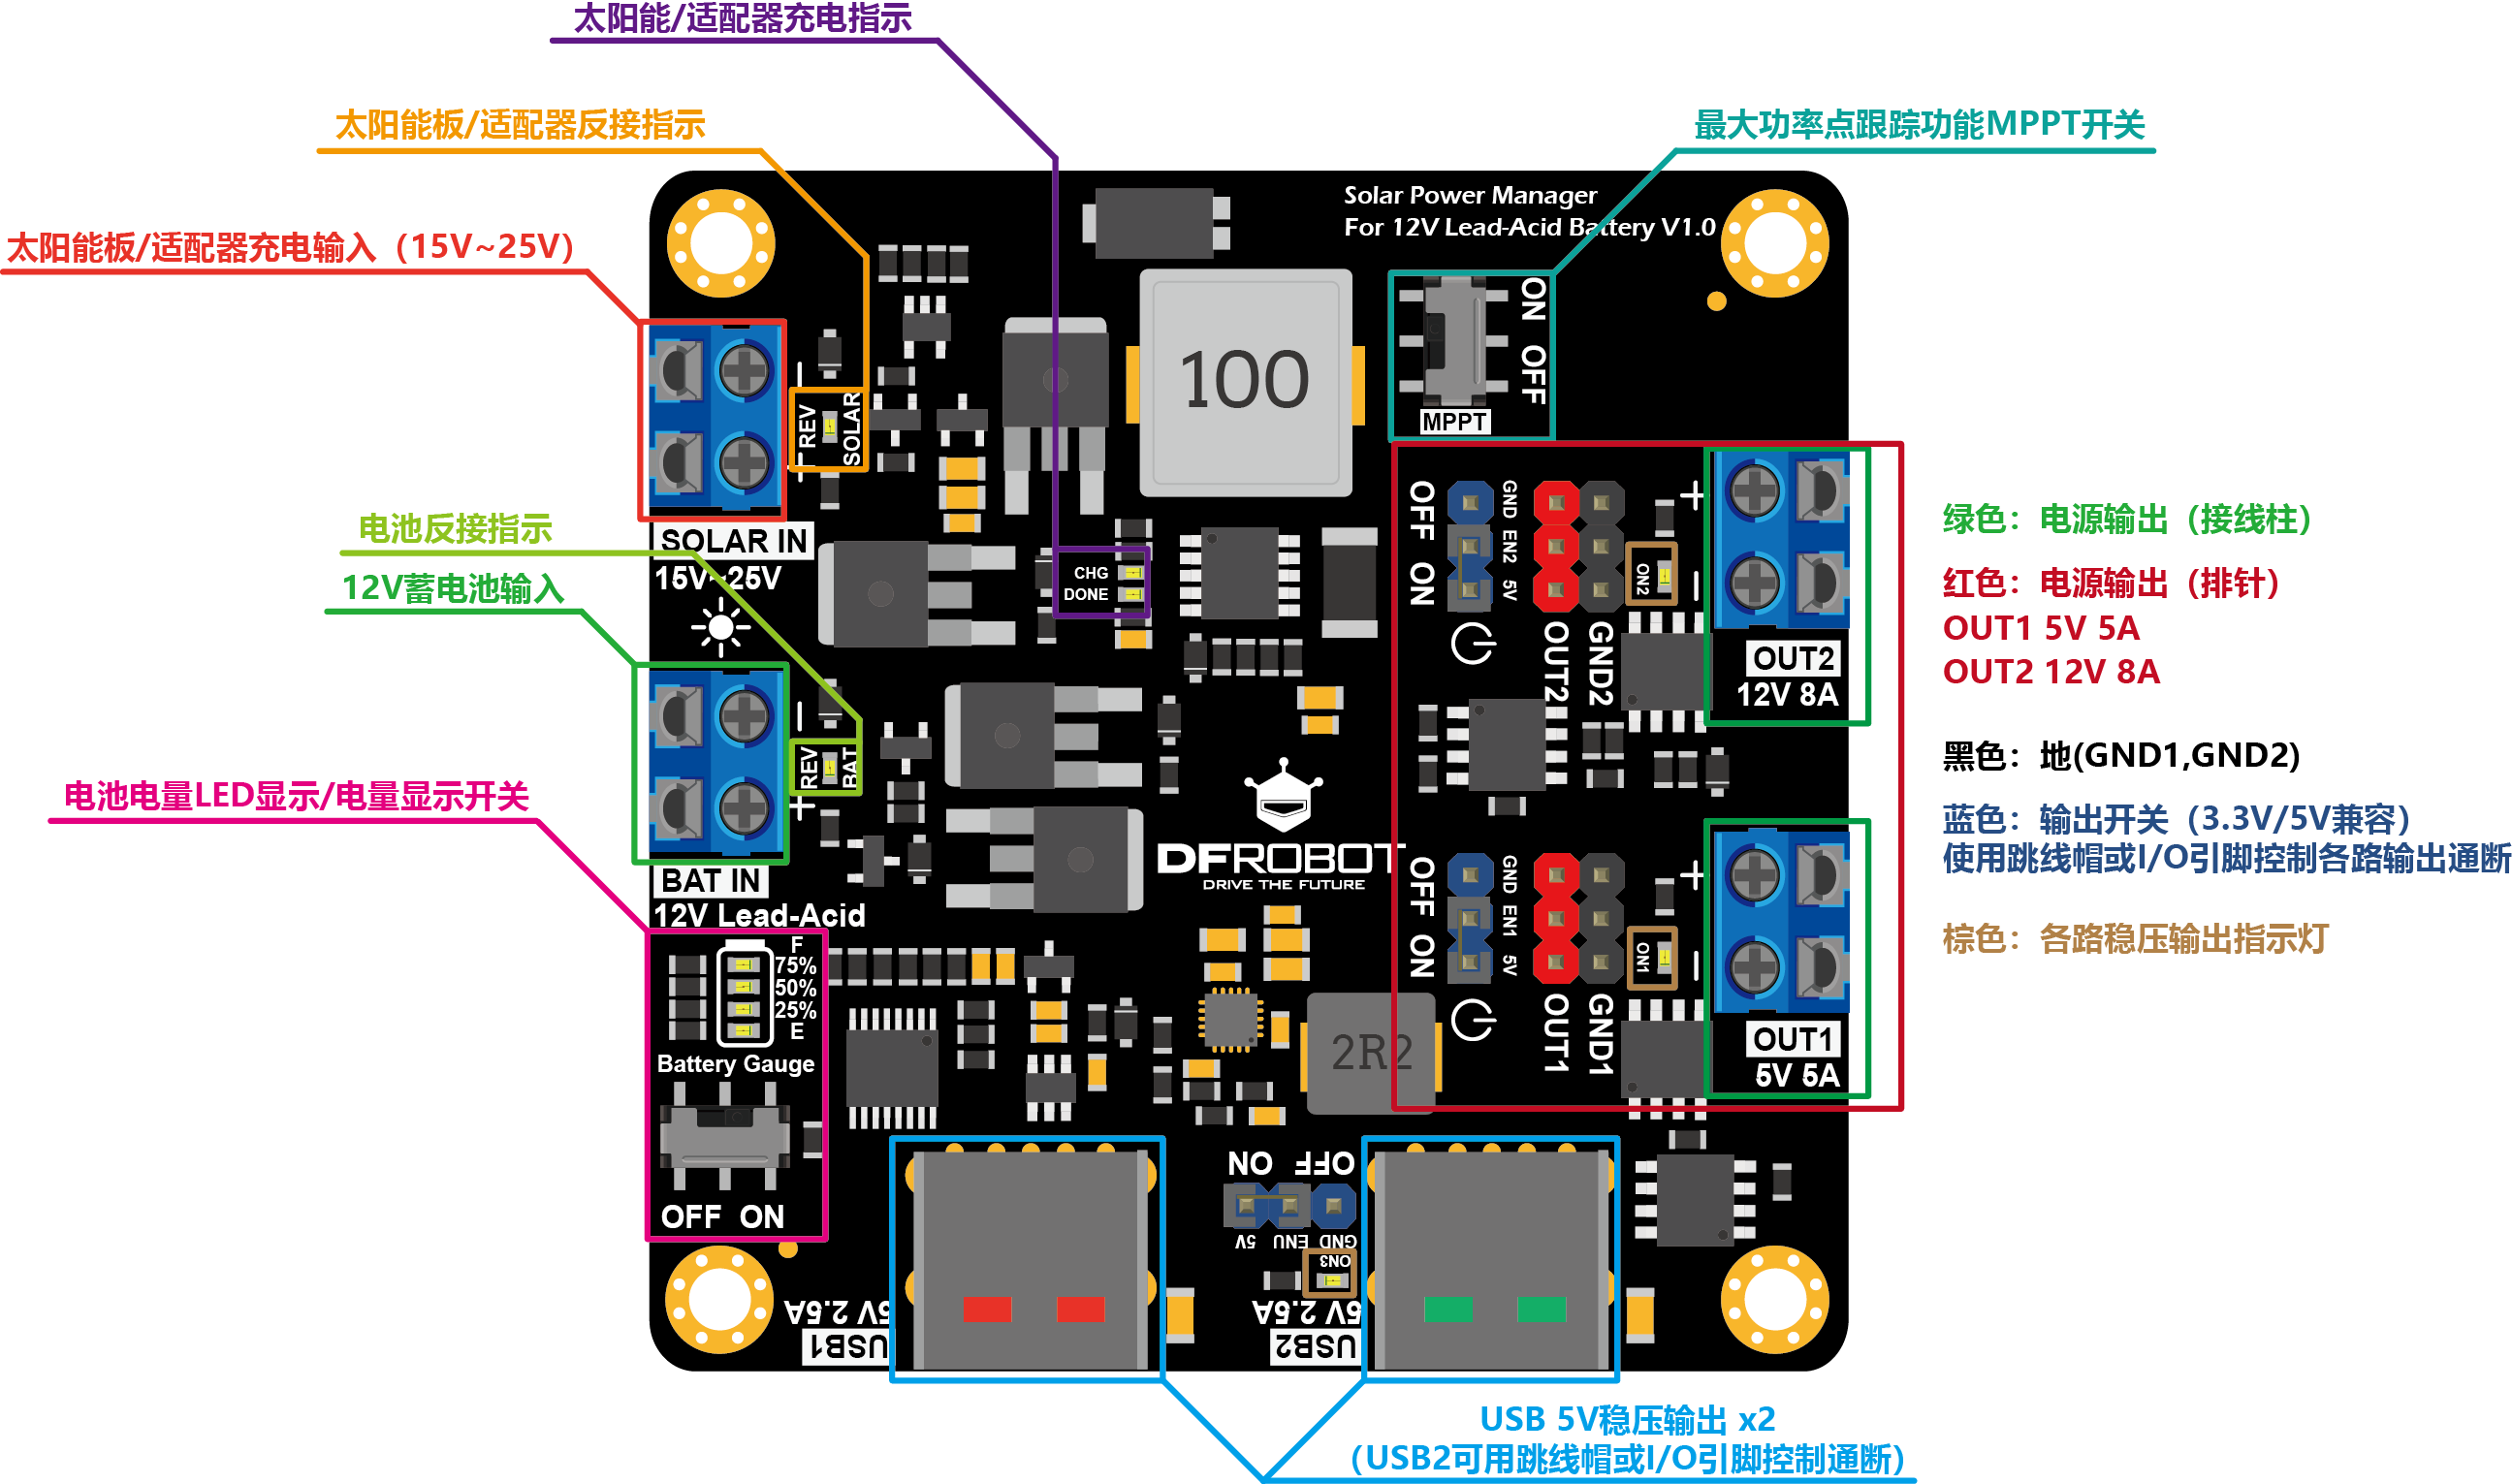 DFR0580_overview(CH).png